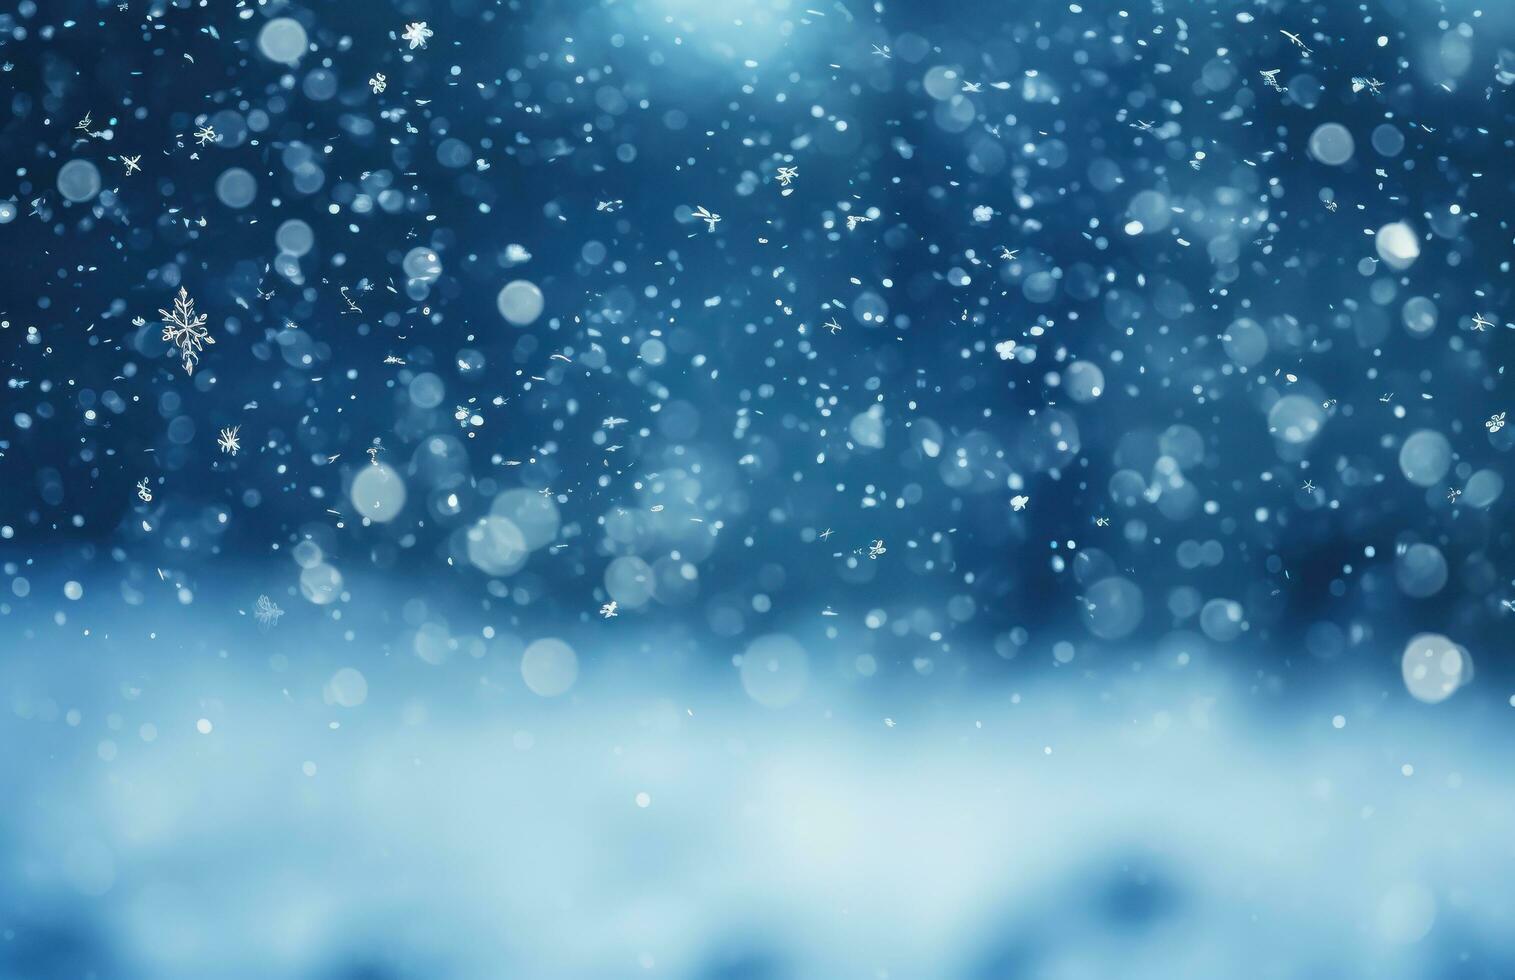 cold background with snow falling from the sky, photo